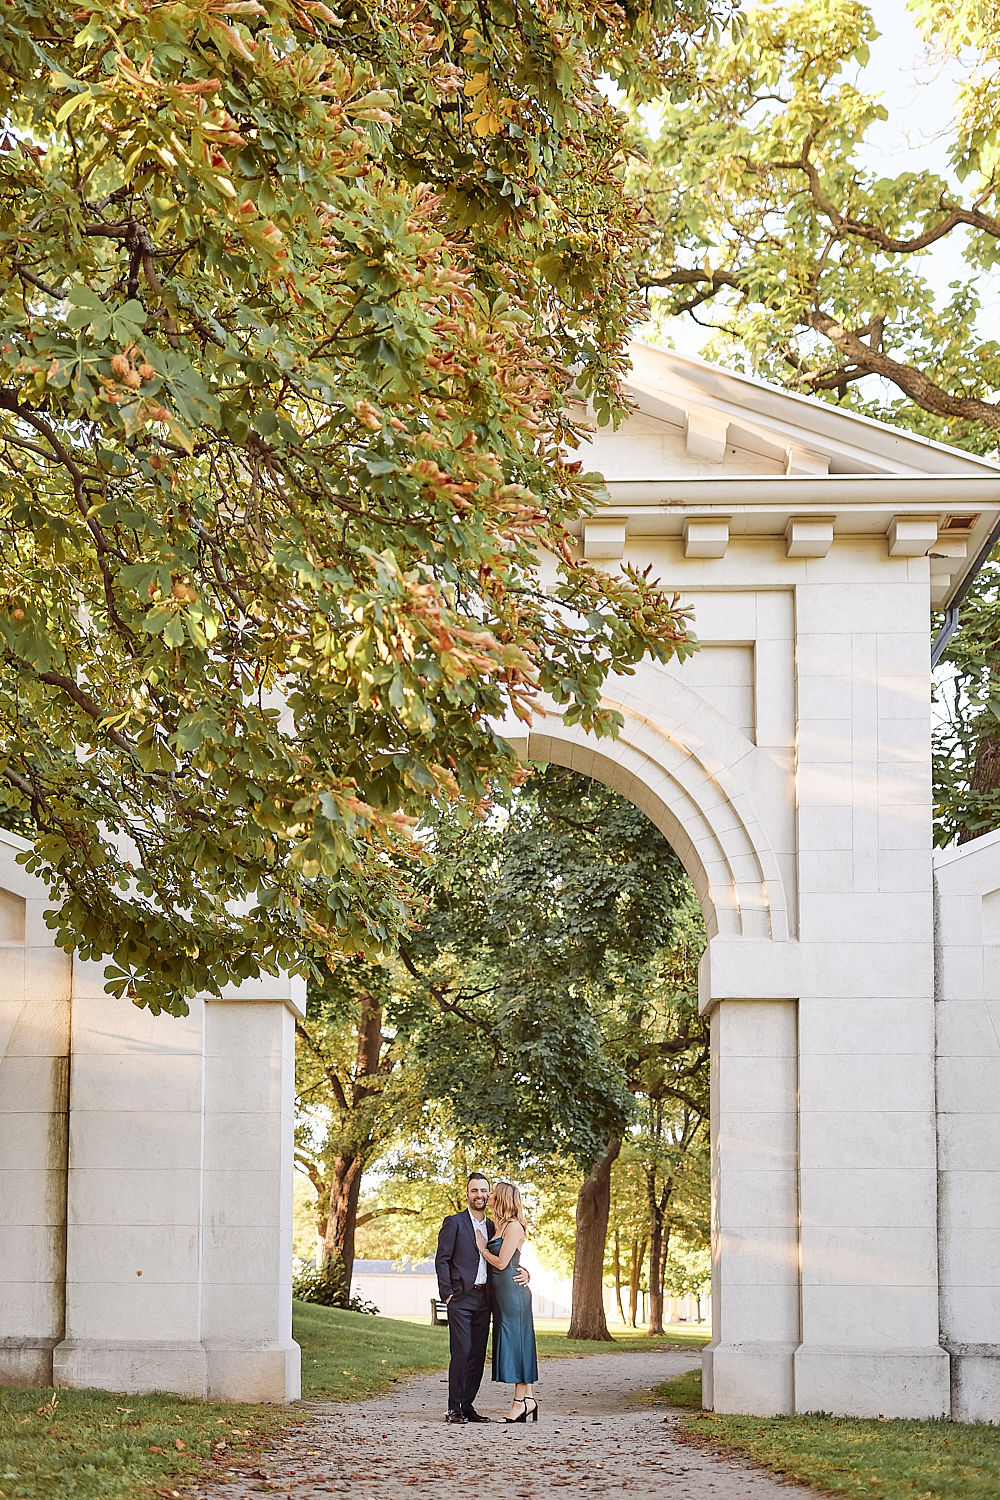 Dundurn Castle Engagement Session – Greco Photo Company